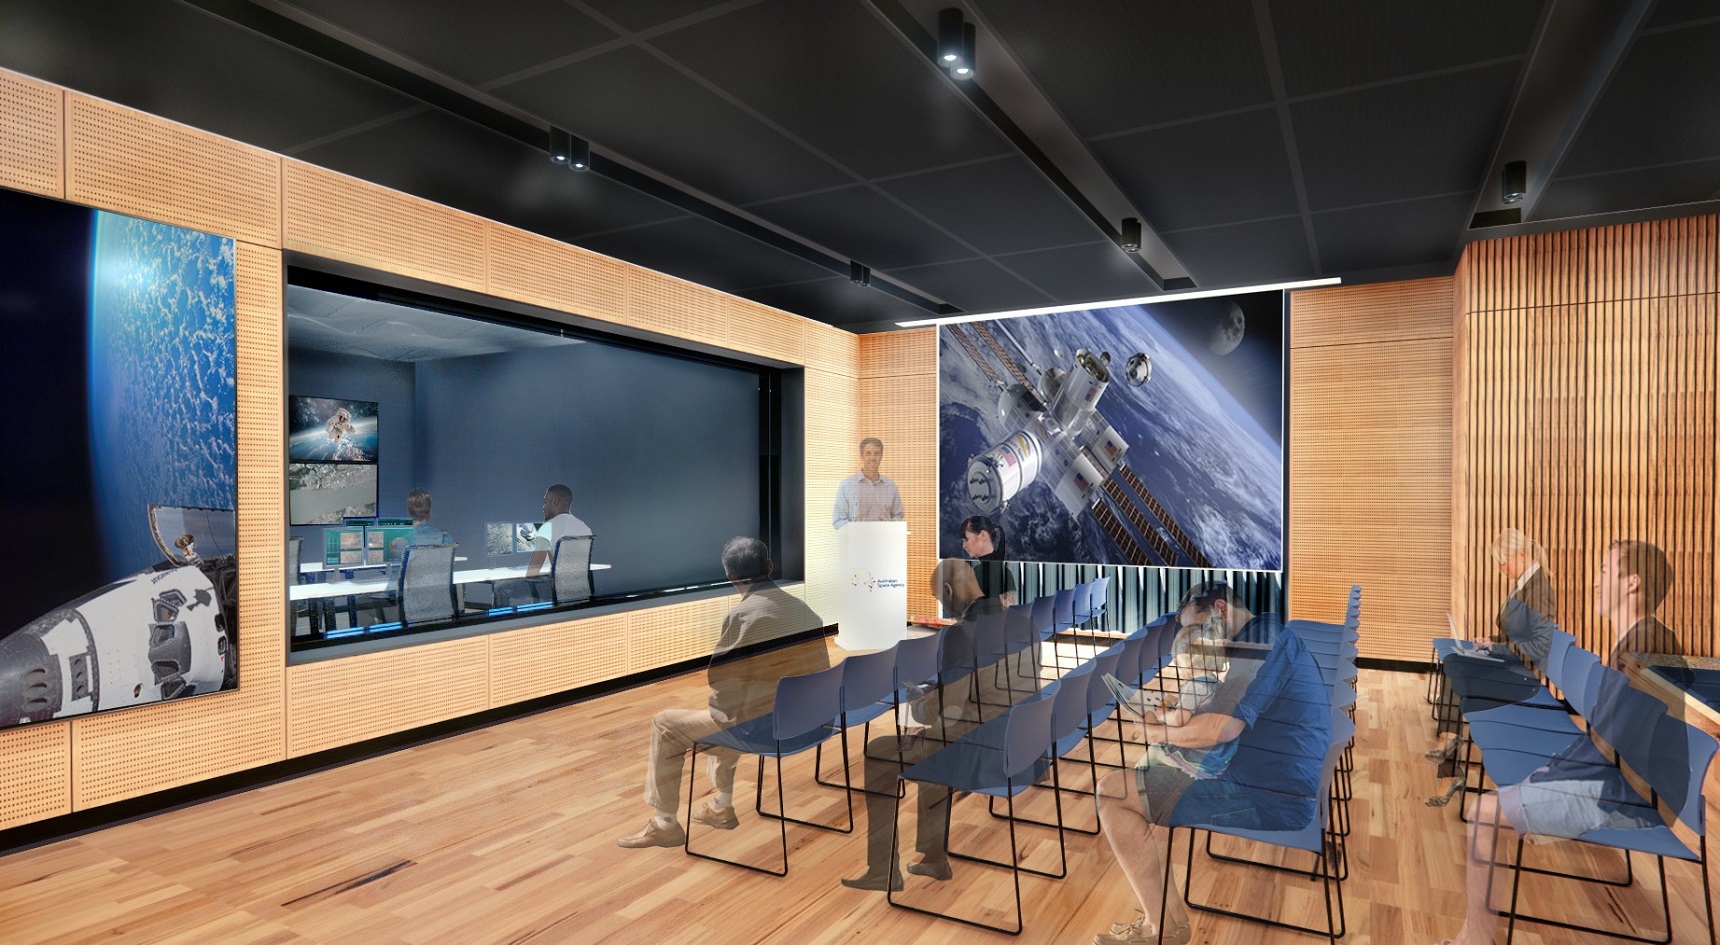 An artist's impression of Mission Control. Image: Australian Space Agency